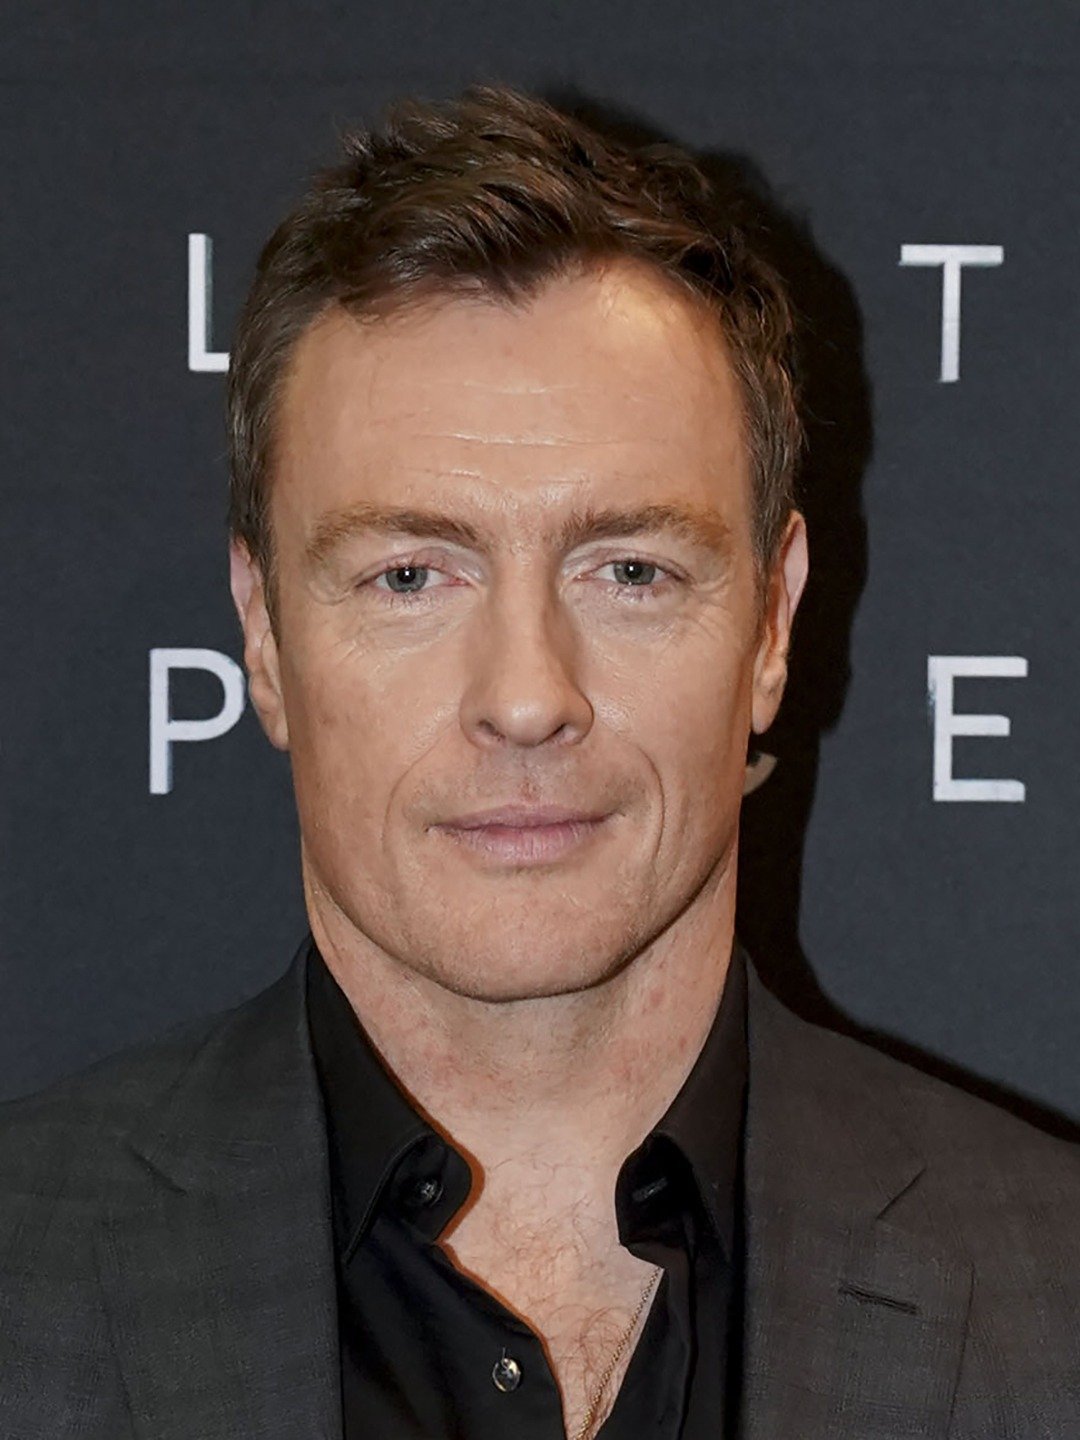 Toby Stephens starring in the new Lost In Space